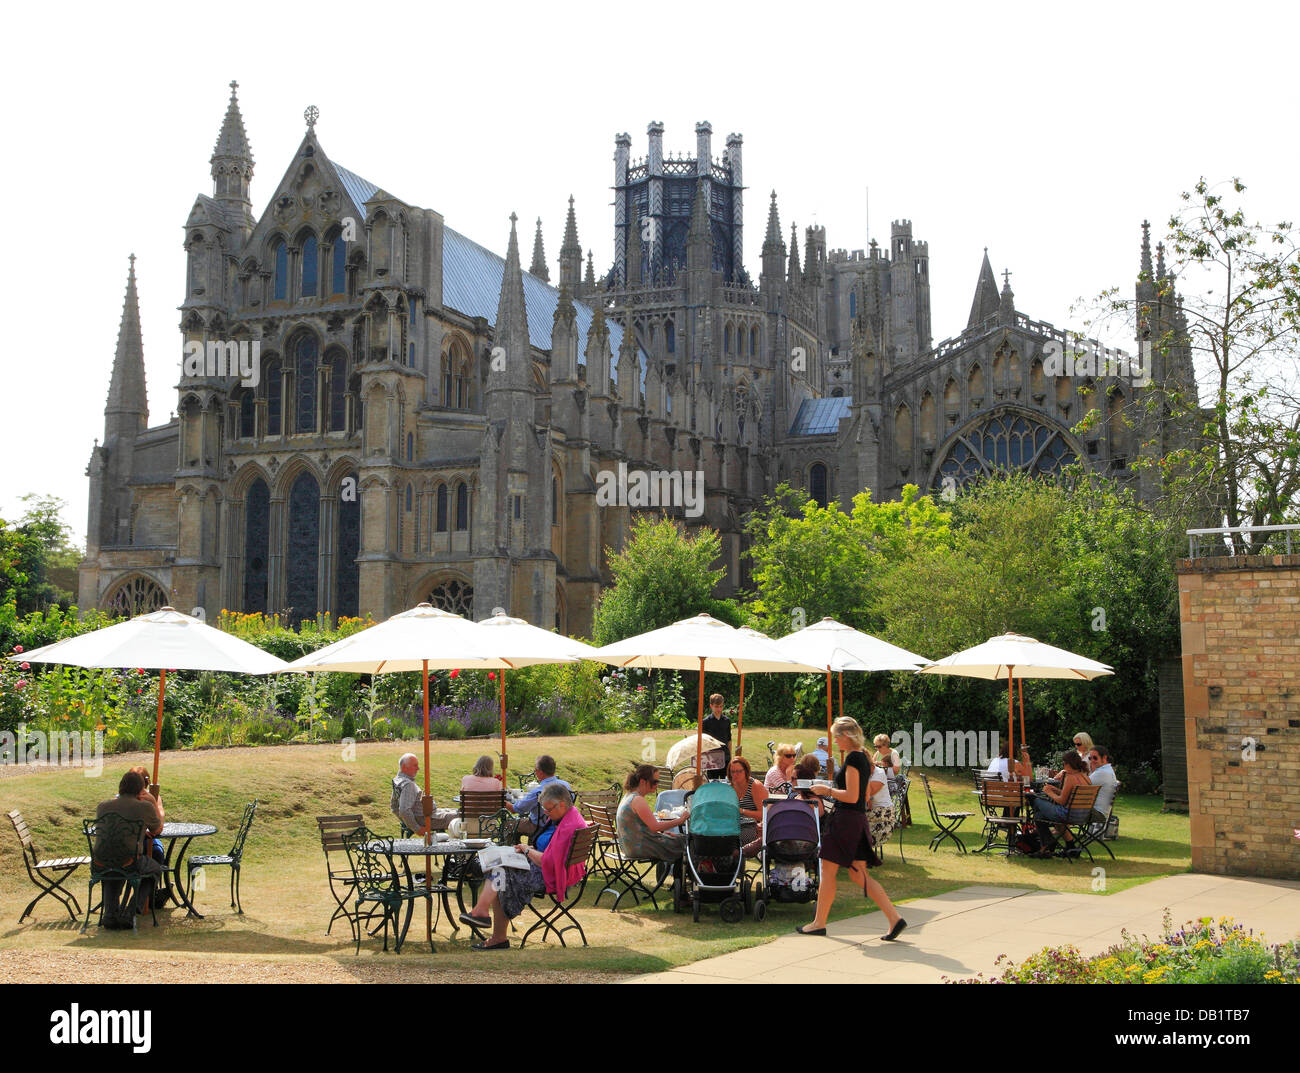 Ely, Almonry Tea Room, Restaurant, Cathedral, Cambridgeshire, England UK English tea rooms cathedrals city cities Stock Photo